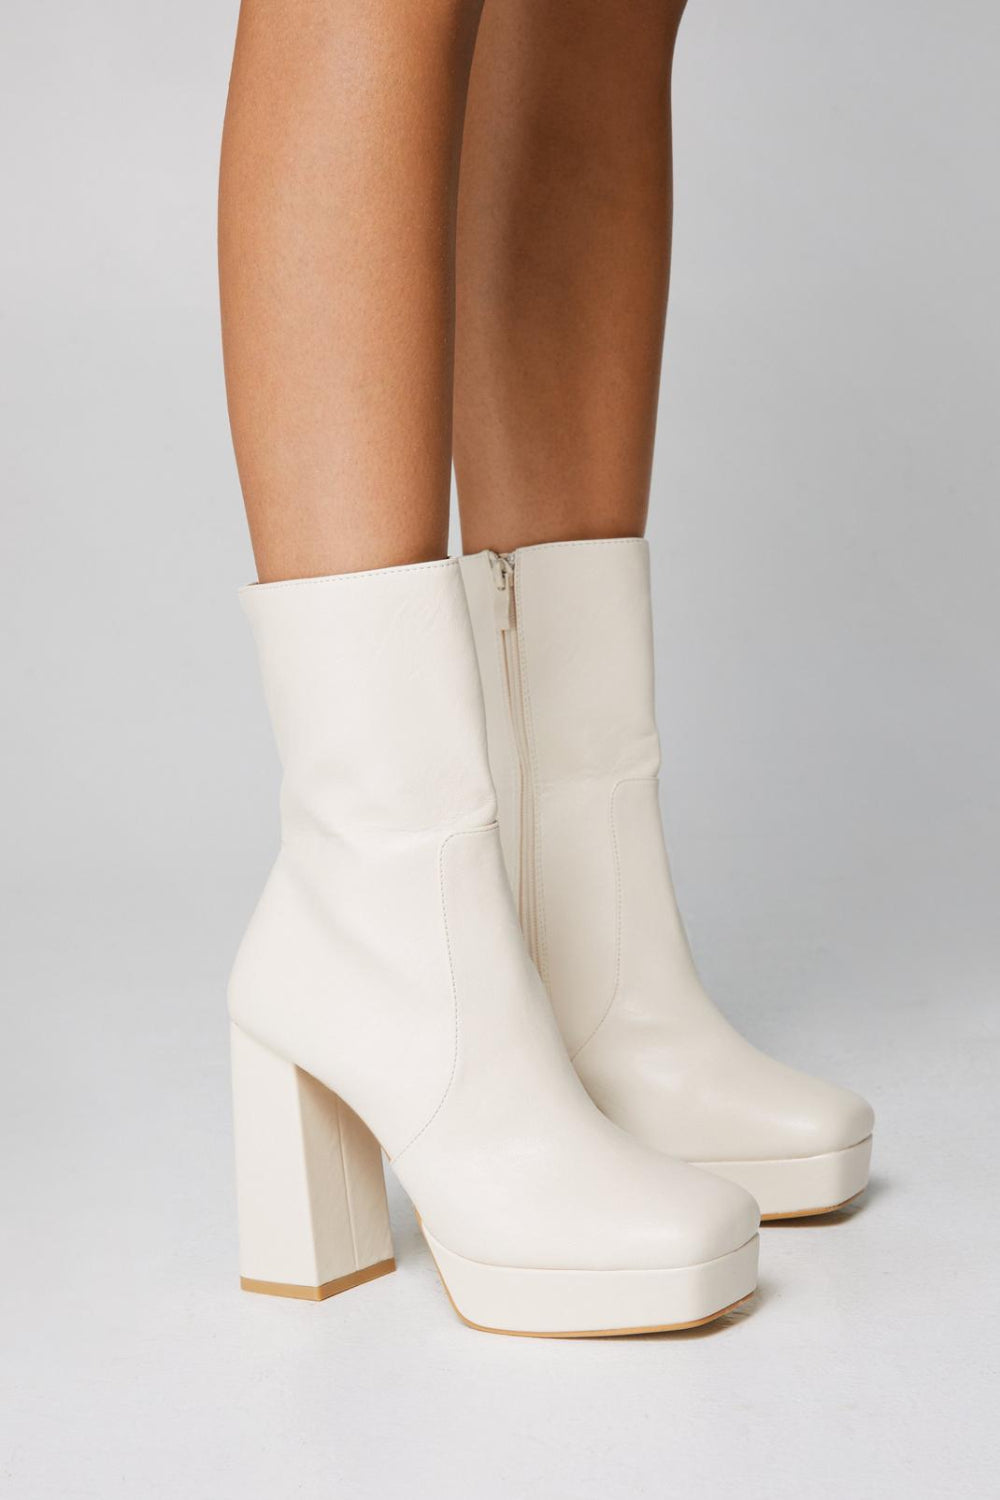 Cream PU Block High Heel Ankle Boots With Side Zip